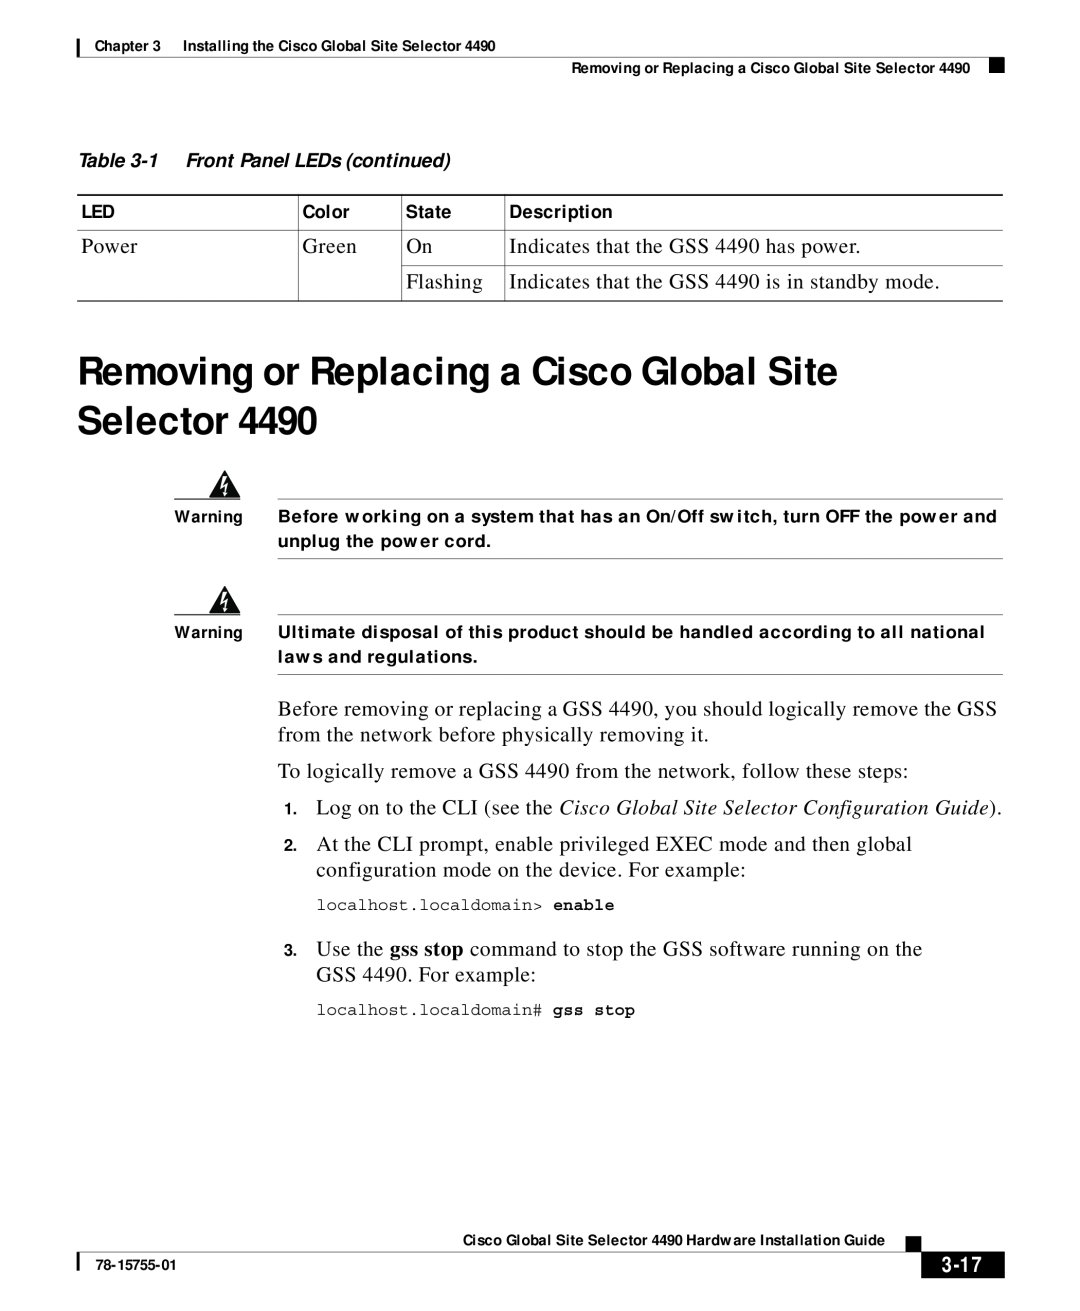 Cisco Systems 4490 appendix Removing or Replacing a Cisco Global Site Selector, 3-17, 1 Front Panel LEDs continued 